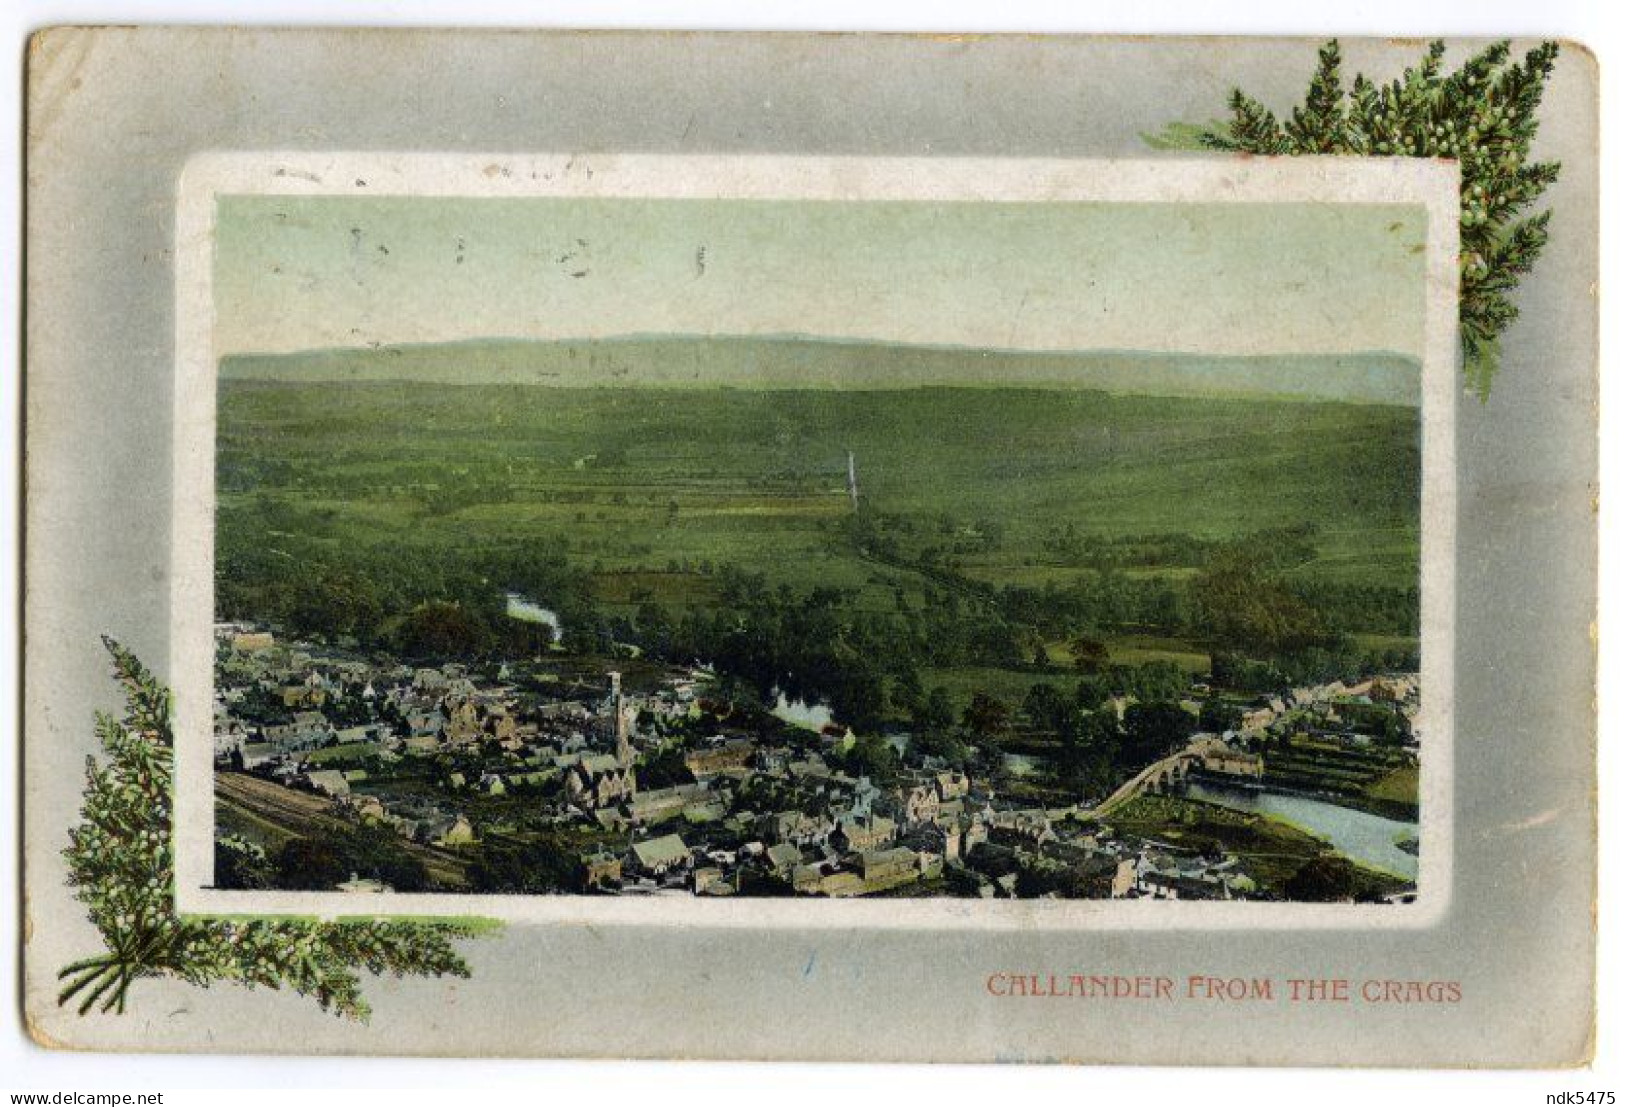 CALLANDER FROM THE CRAGS / STIRLING, BASE HOSPITAL, ARMY VETERINARY CORPS, (THOMSON), 1917 - Stirlingshire